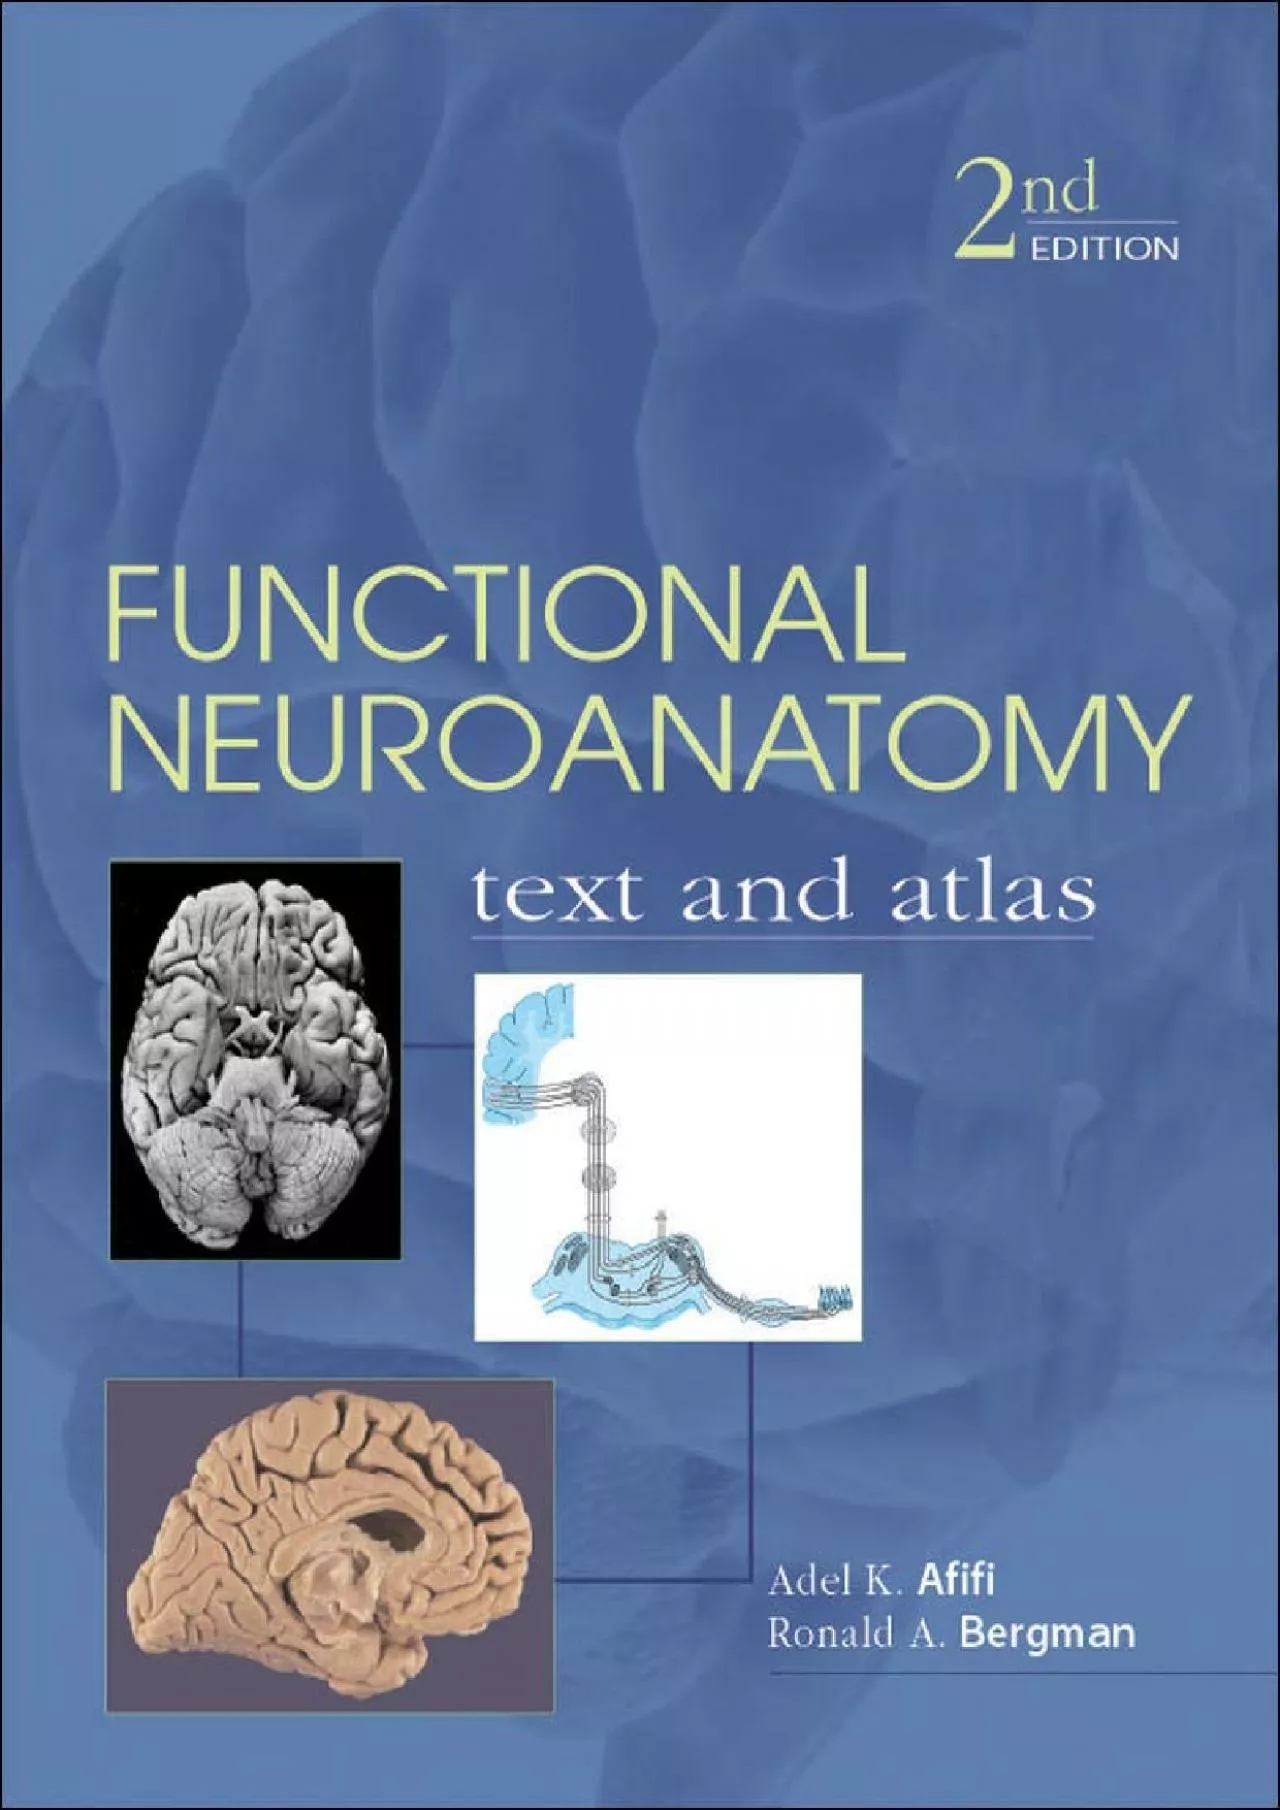 (DOWNLOAD)-Functional Neuroanatomy: Text and Atlas, 2nd Edition: Text and Atlas (LANGE